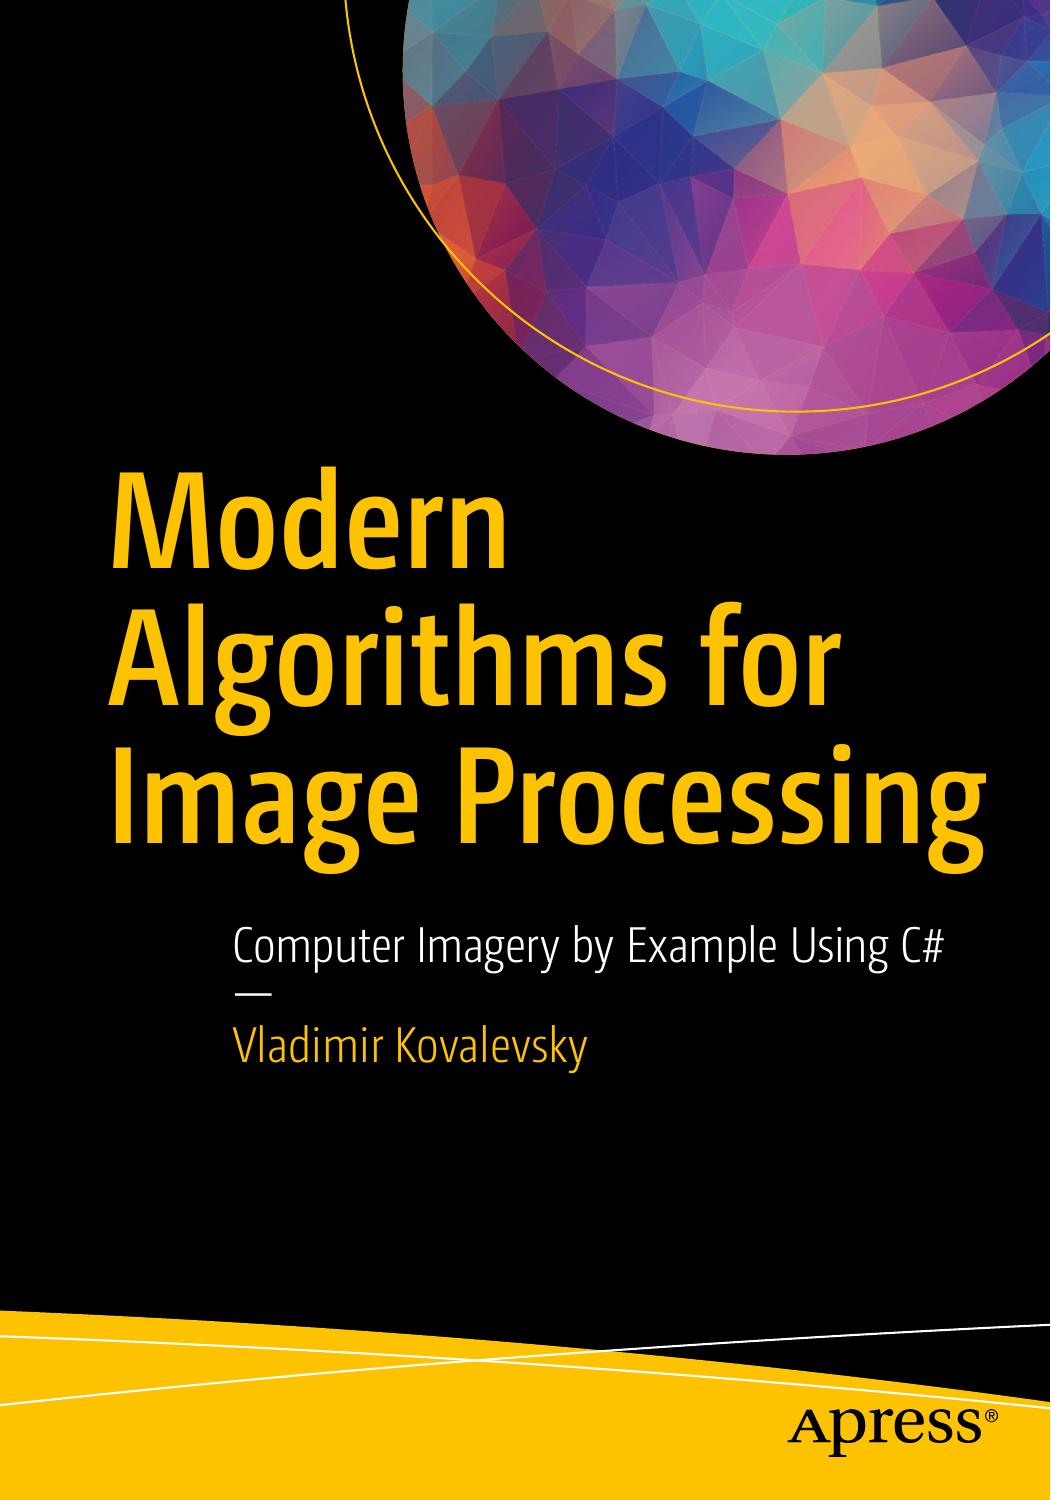 Modern Algorithms for Image Processing Computer Imagery by Example Using C# 2019